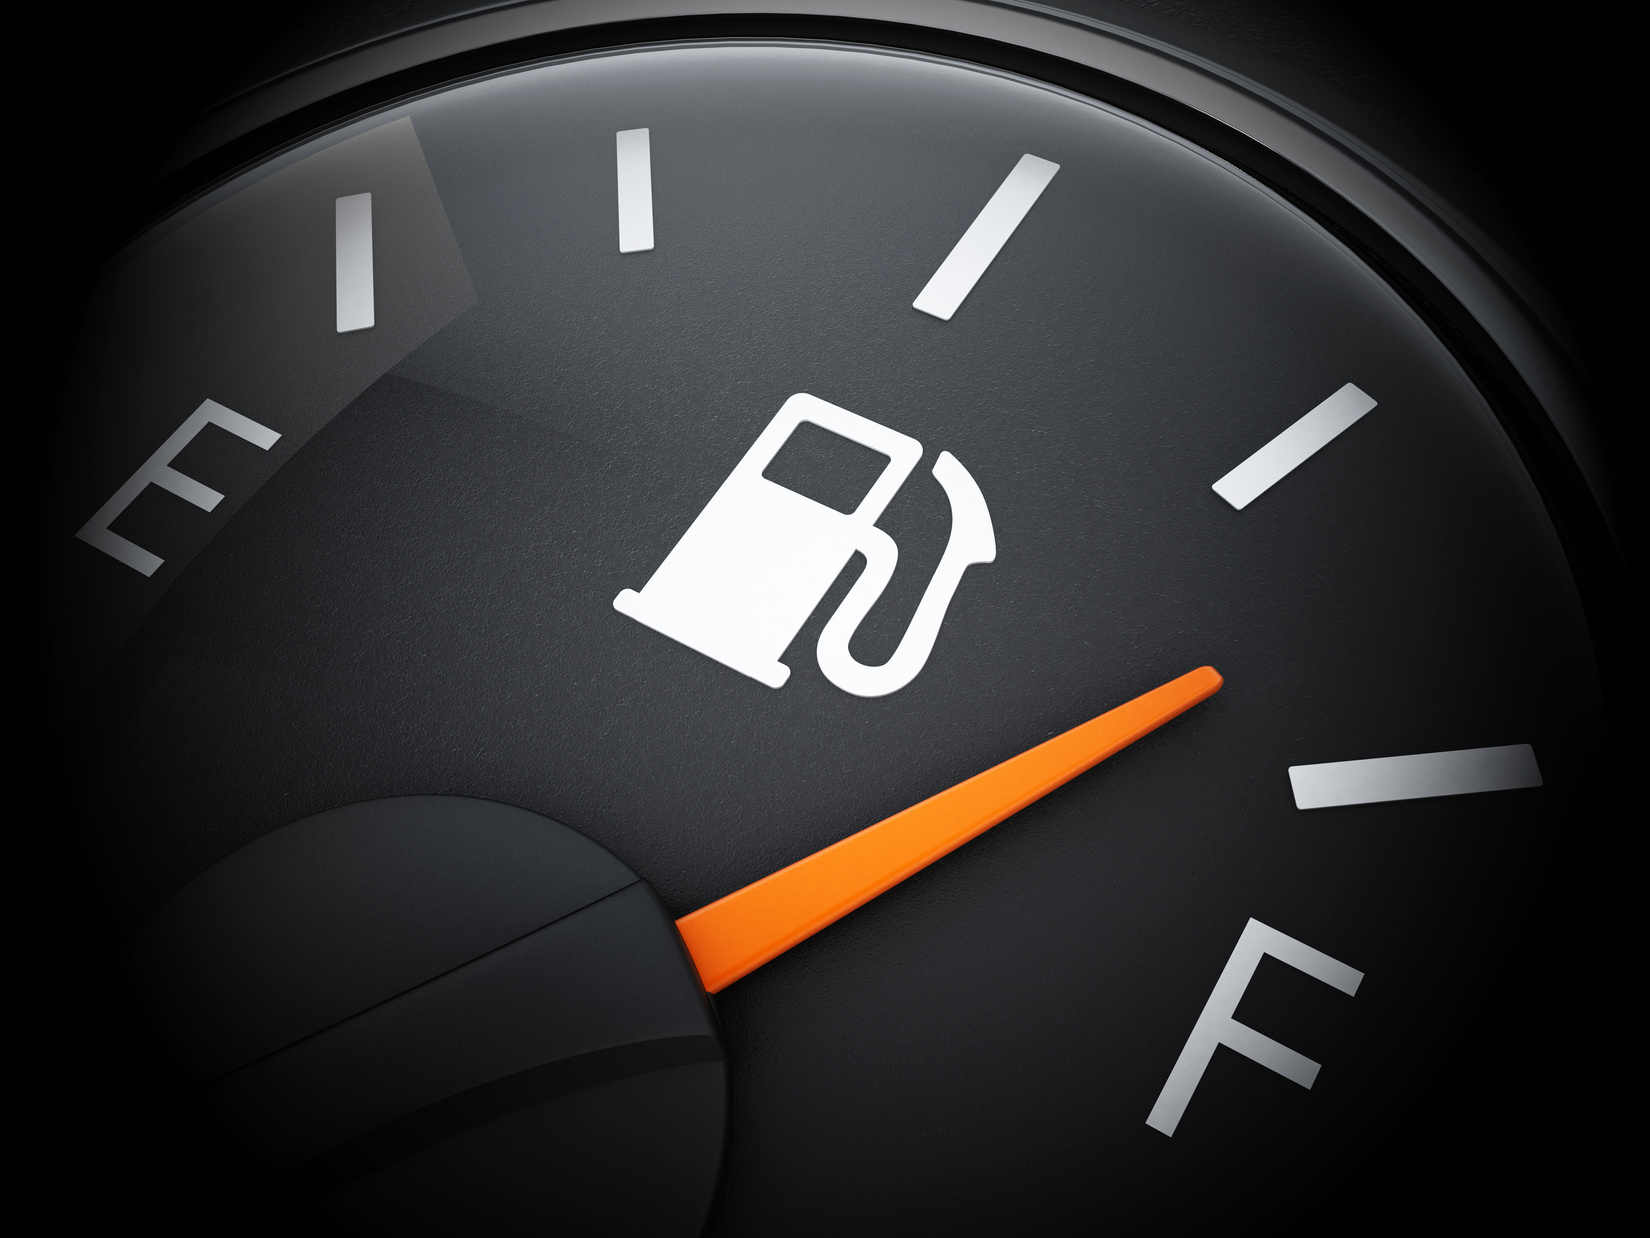 Fuel gauge with needle on E indicating empty car tank